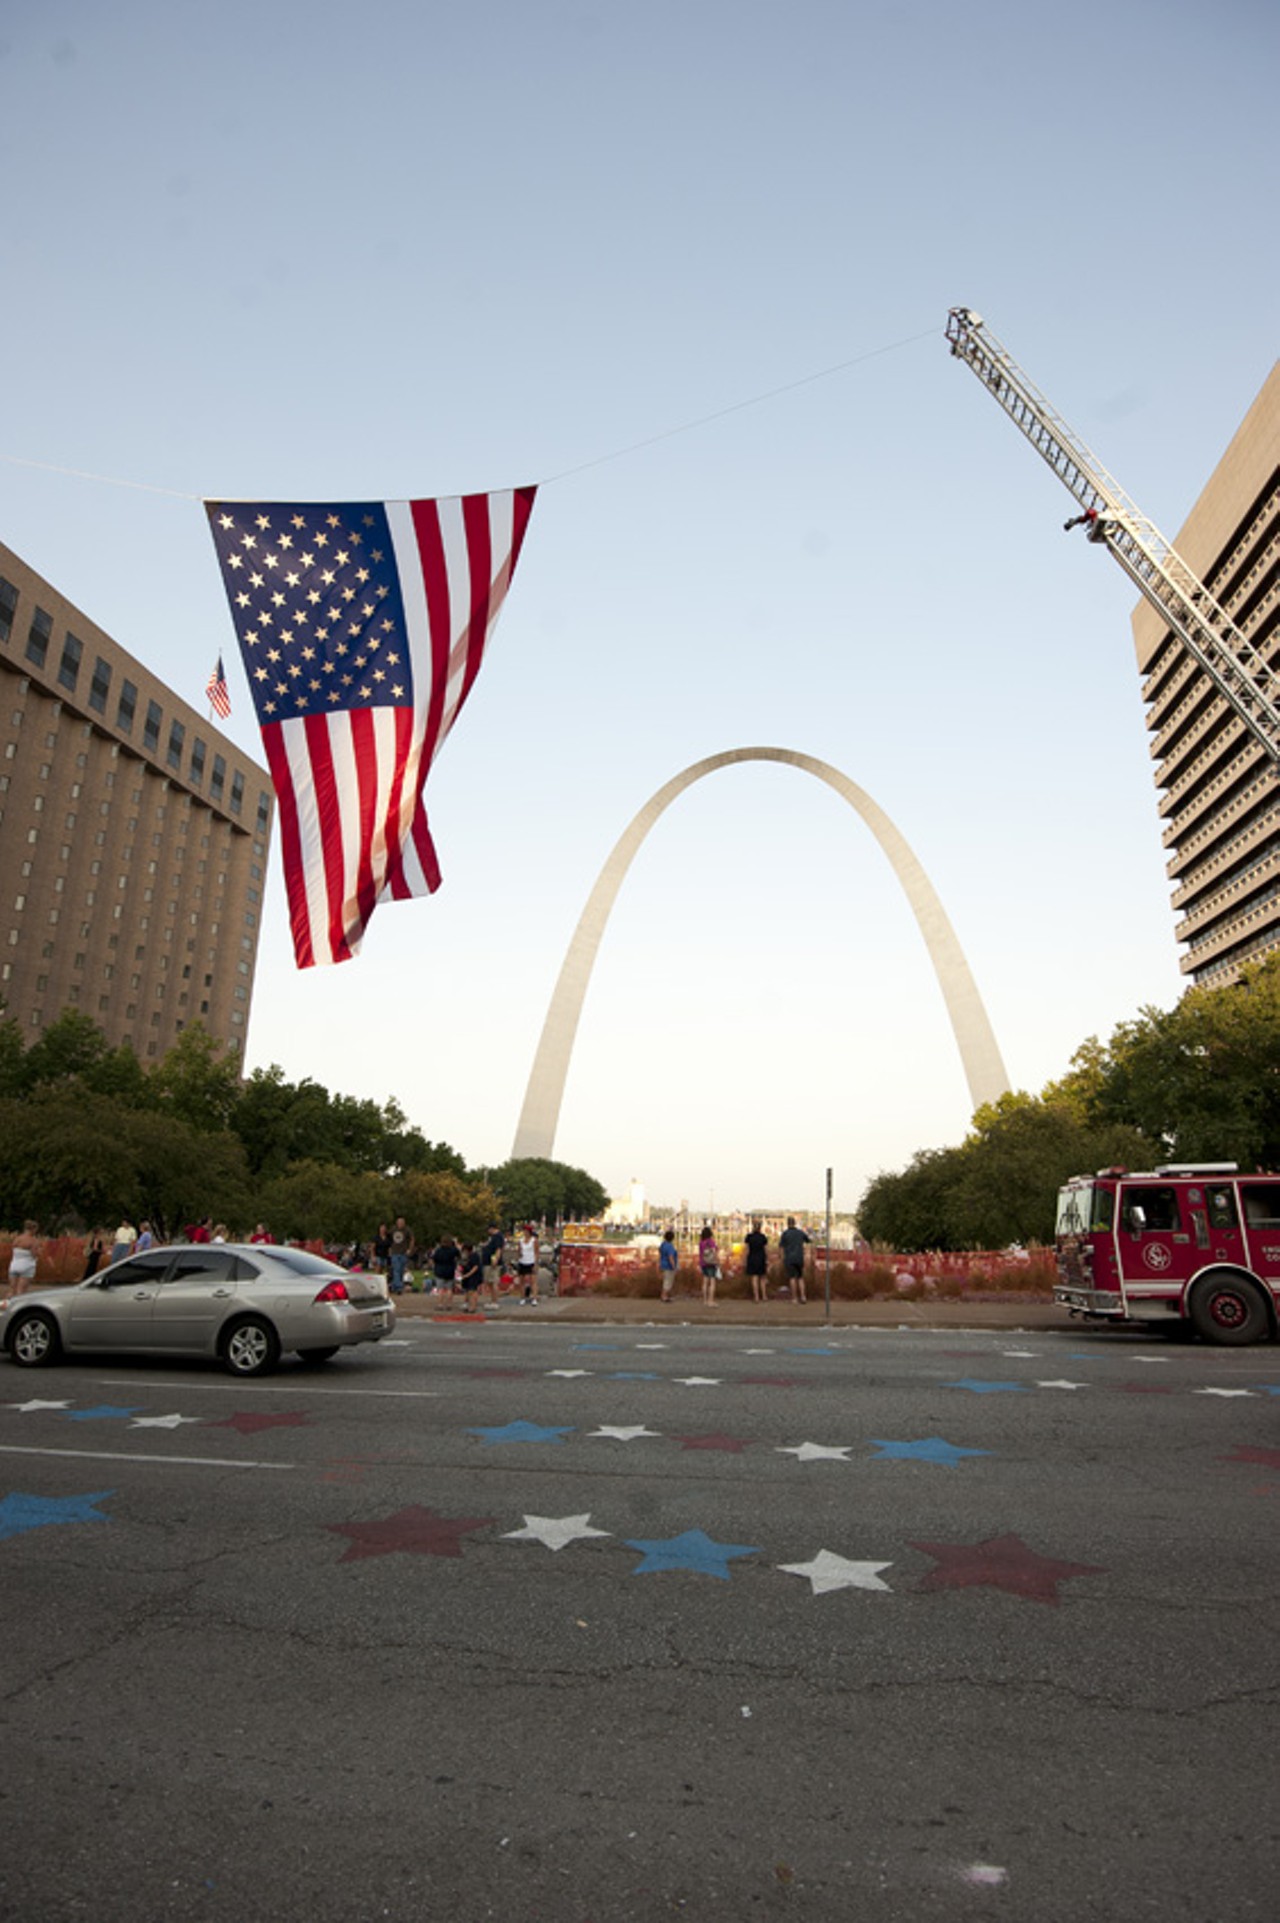 Downtown St. Louis on America's birthday.